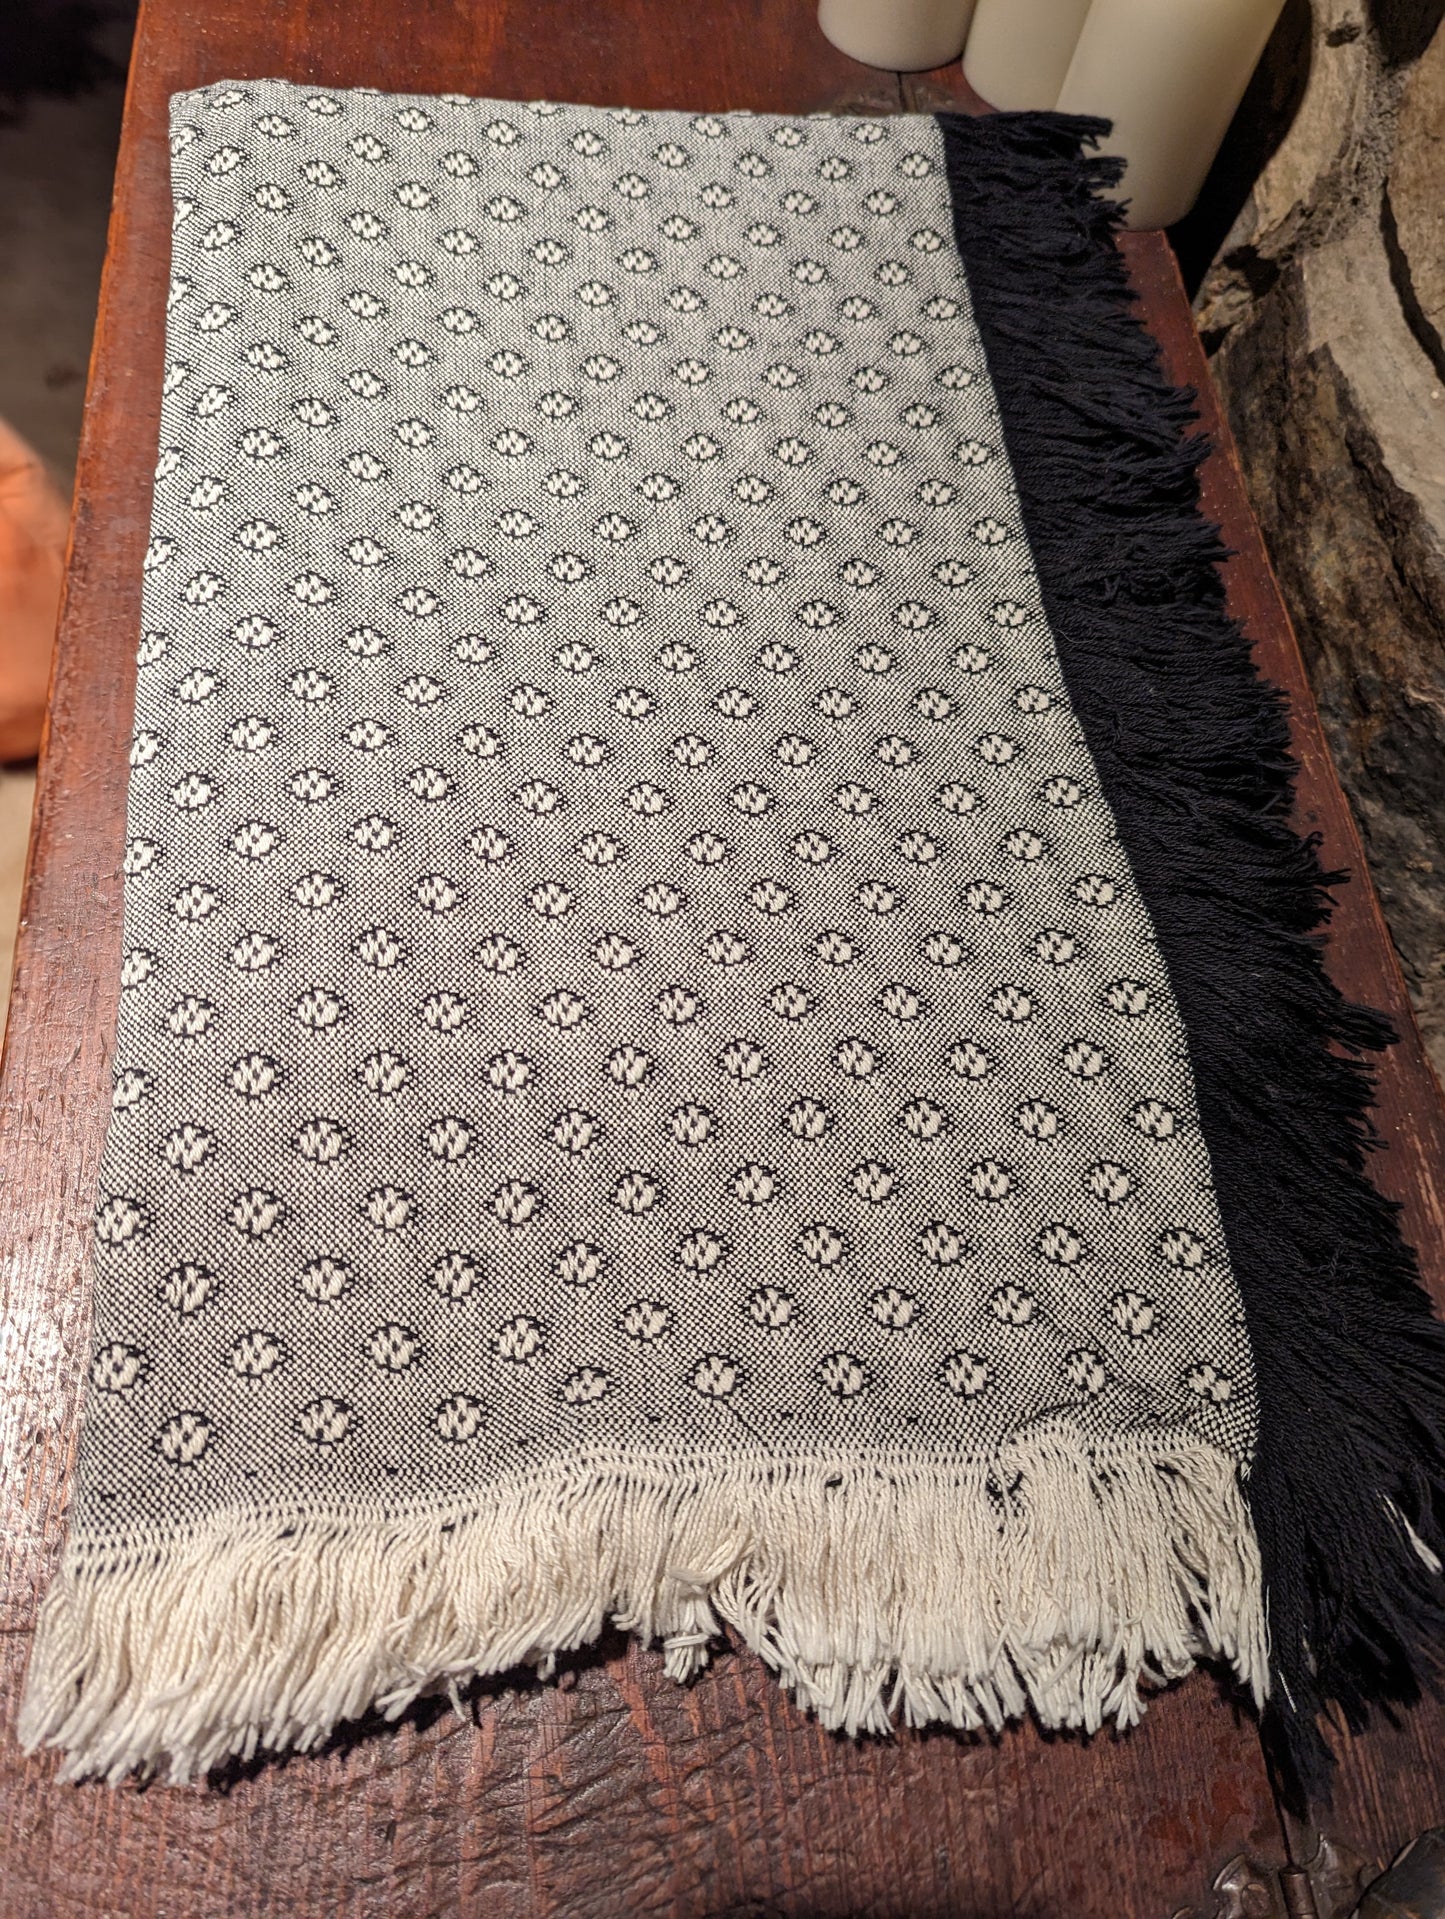 Classic Black & White Woven Throw Blanket - Made in the USA